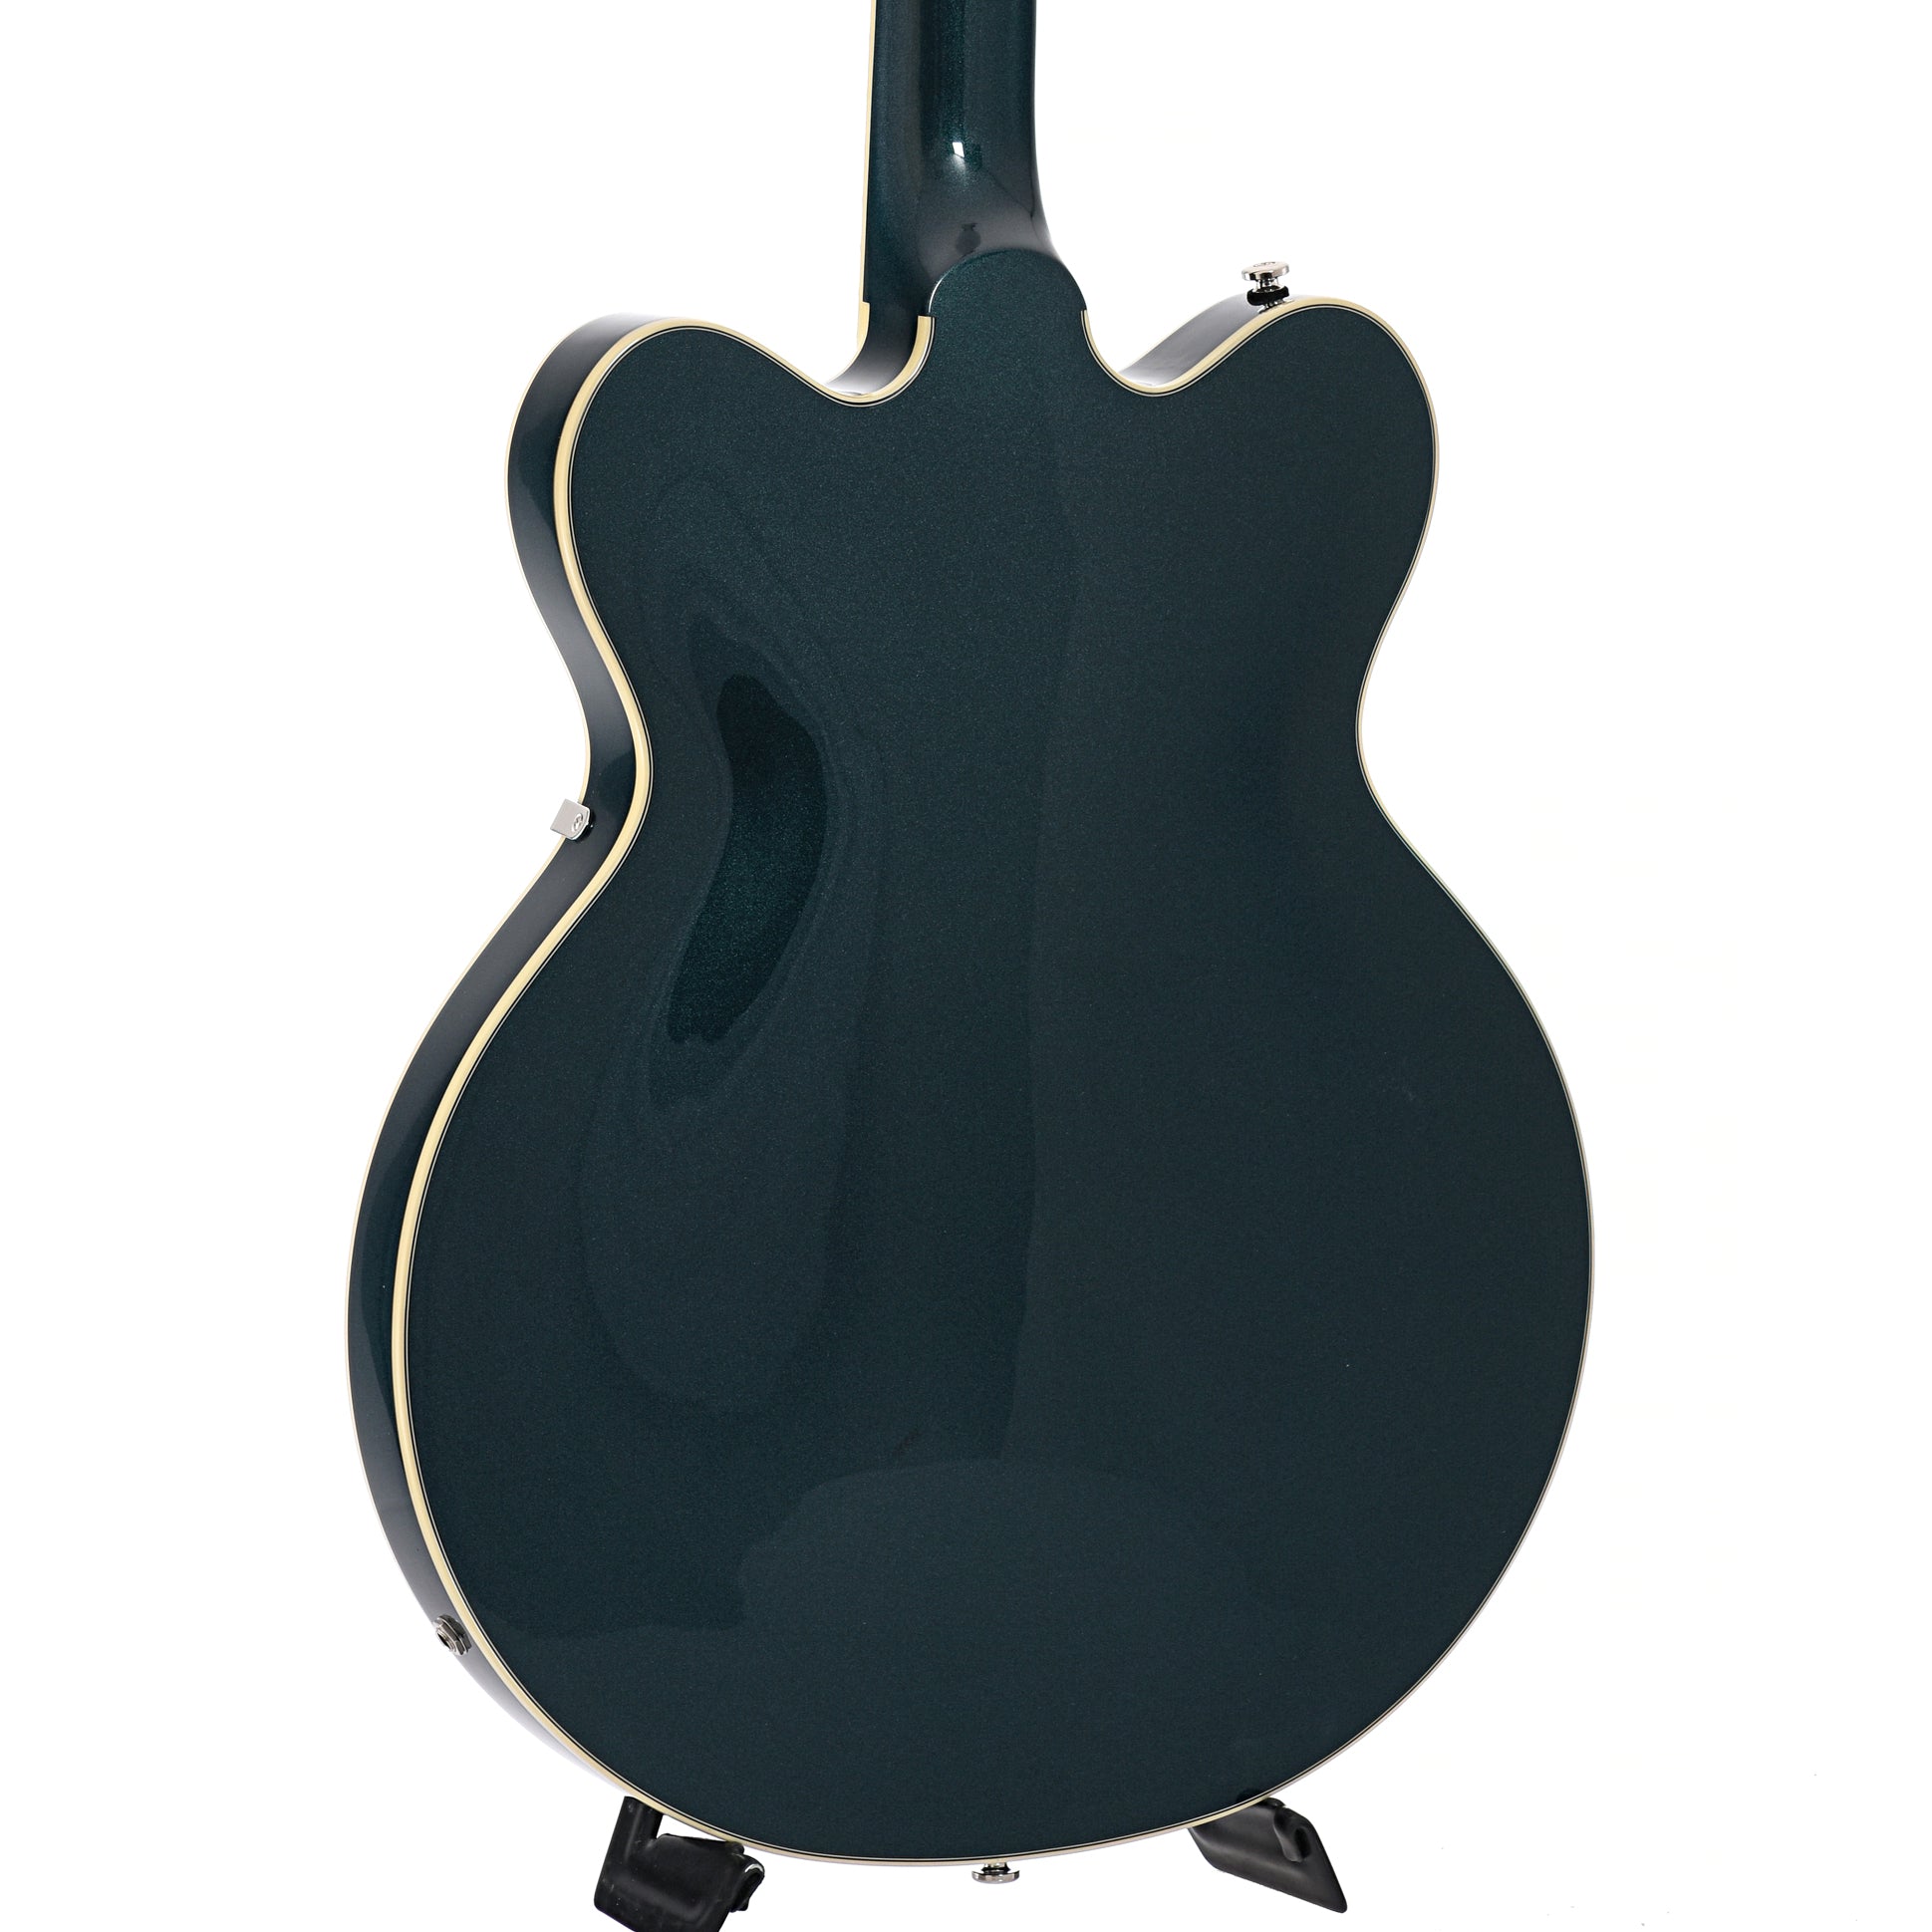 Image 10 of Gretsch G2622 Streamliner Center-Block Double Cutaway Hollow Body Guitar, Midnight Sapphire- SKU# G2622-MDSPH : Product Type Hollow Body Electric Guitars : Elderly Instruments